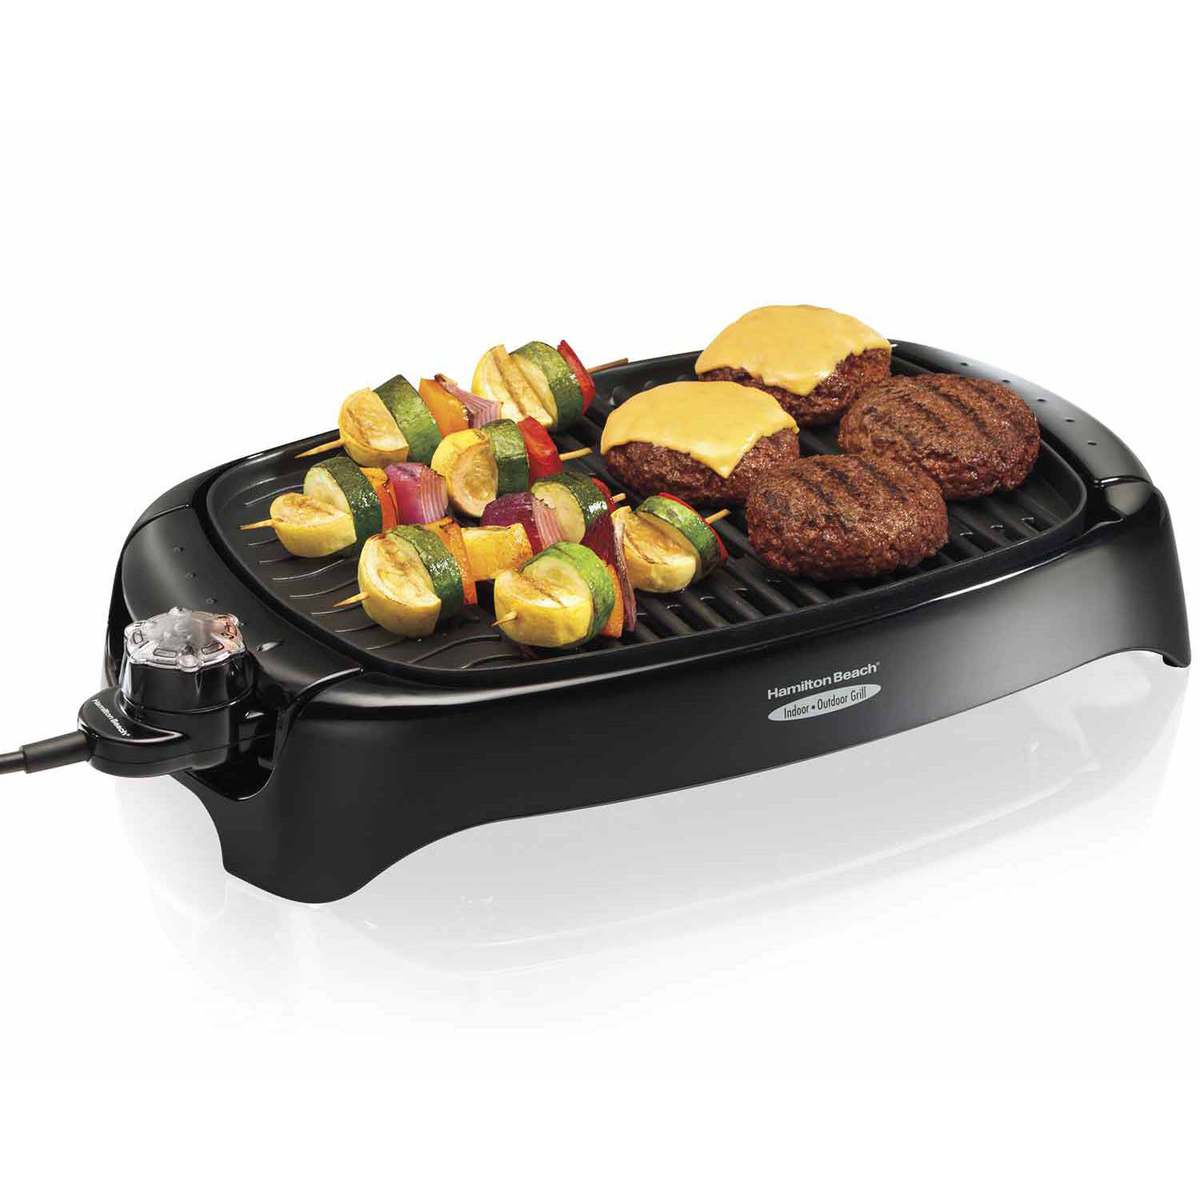 Hamilton Beach Electric Indoor Searing Grill with Viewing Window, Removable  Easy to Clean Nonstick Plate, 6-Serving, Extra-Large Drip Tray, Stainless